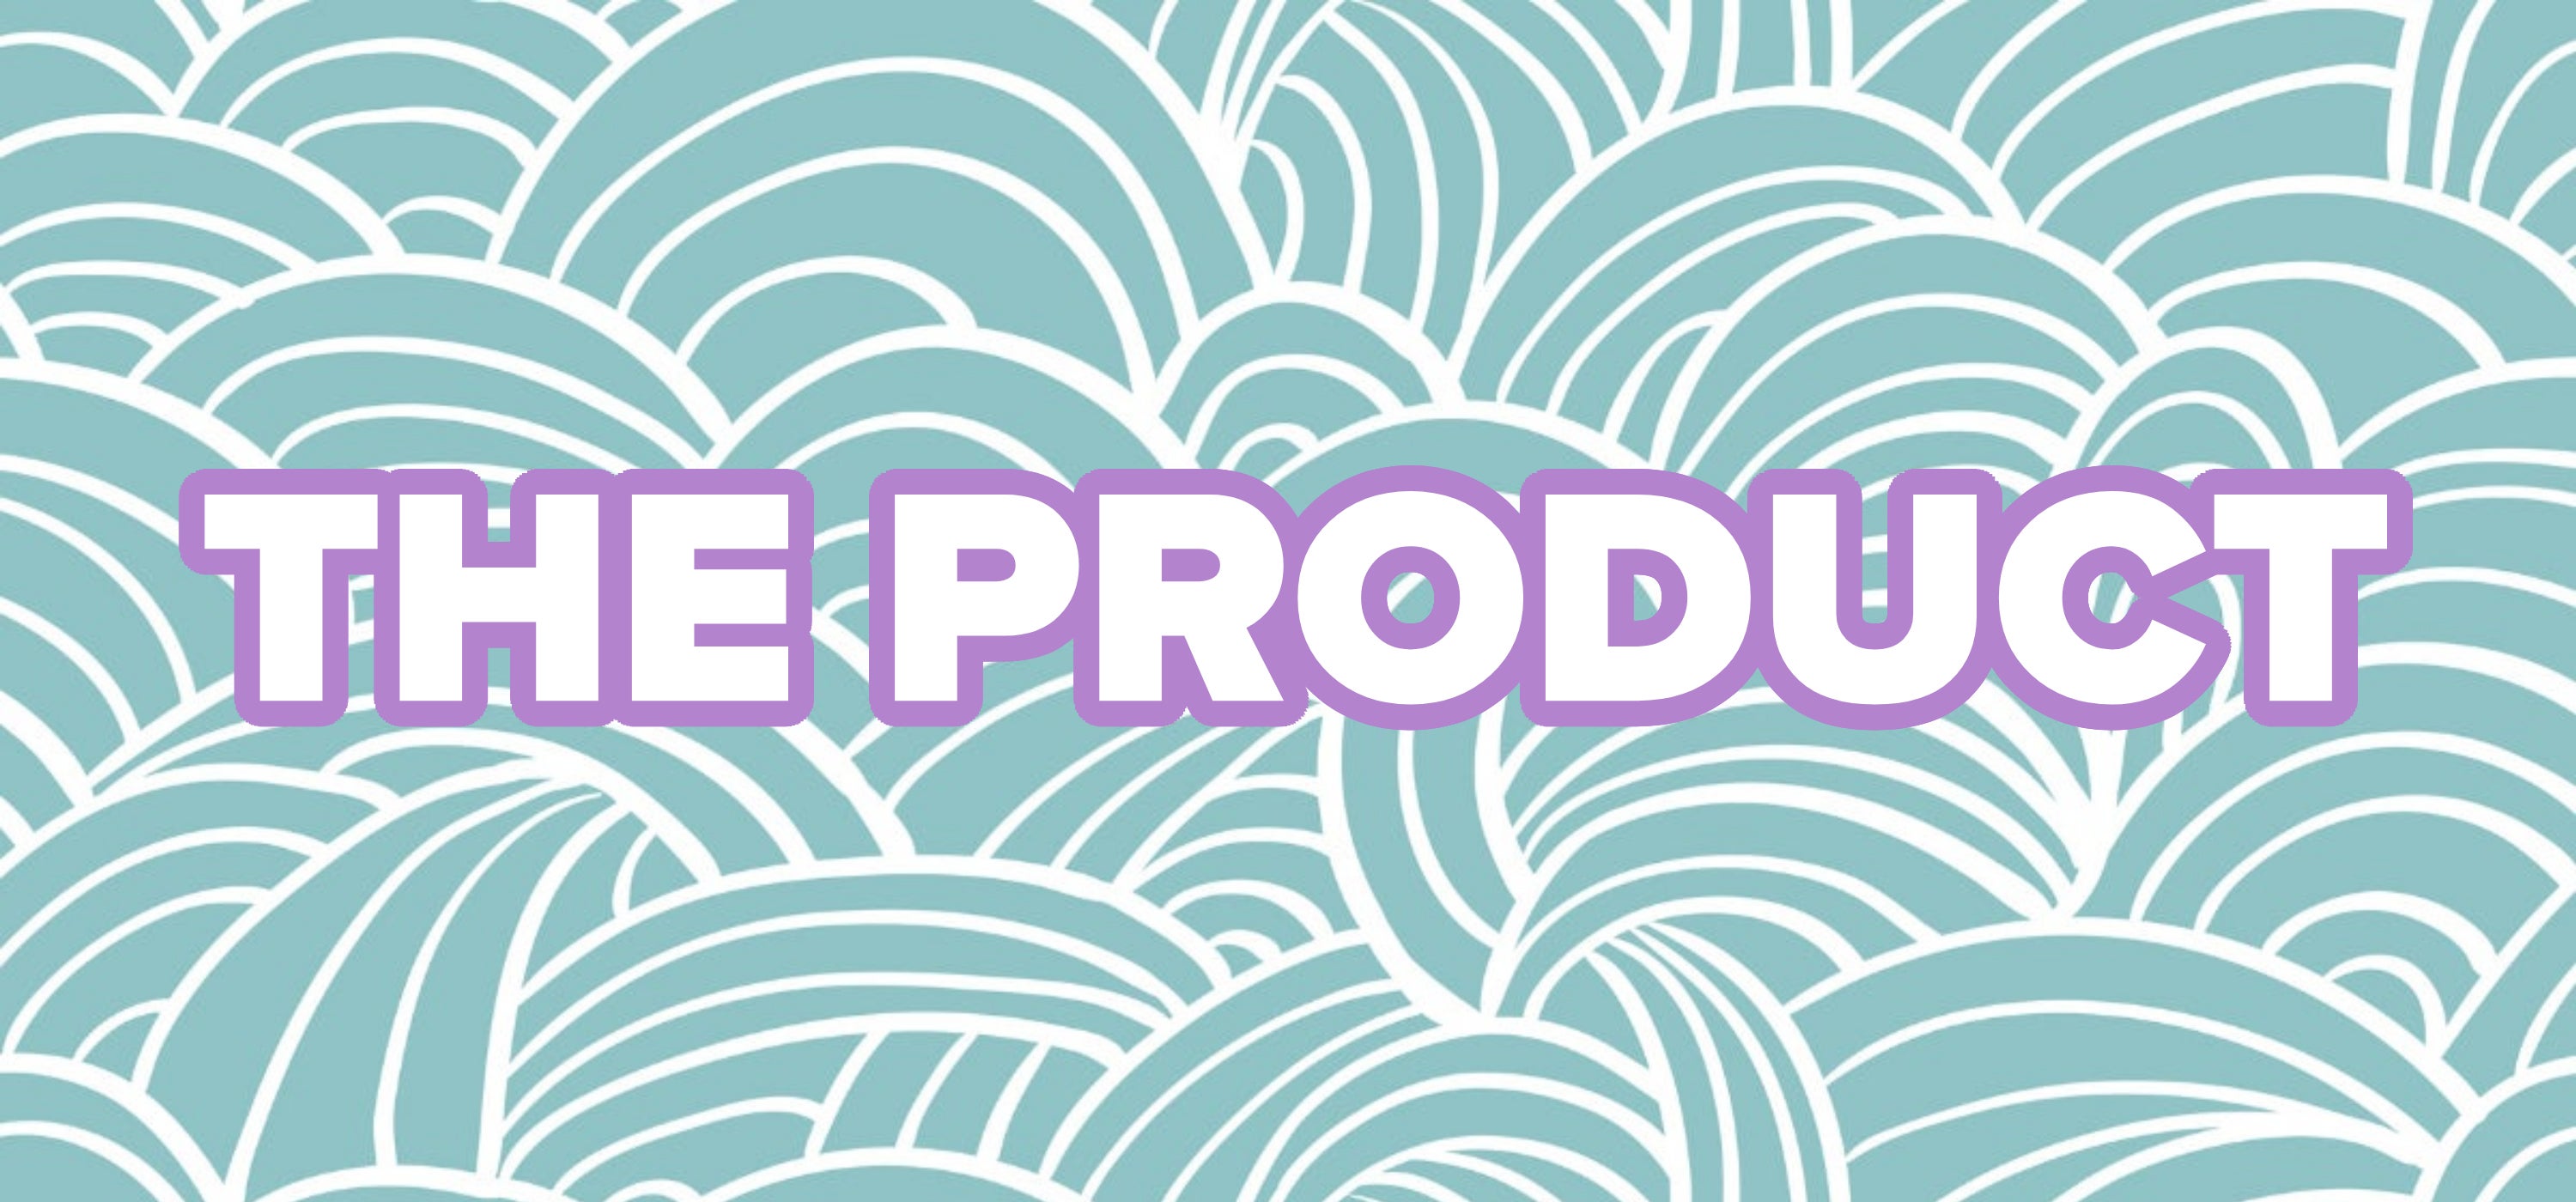 Text: &quot;THE PRODUCT&quot; over a patterned background